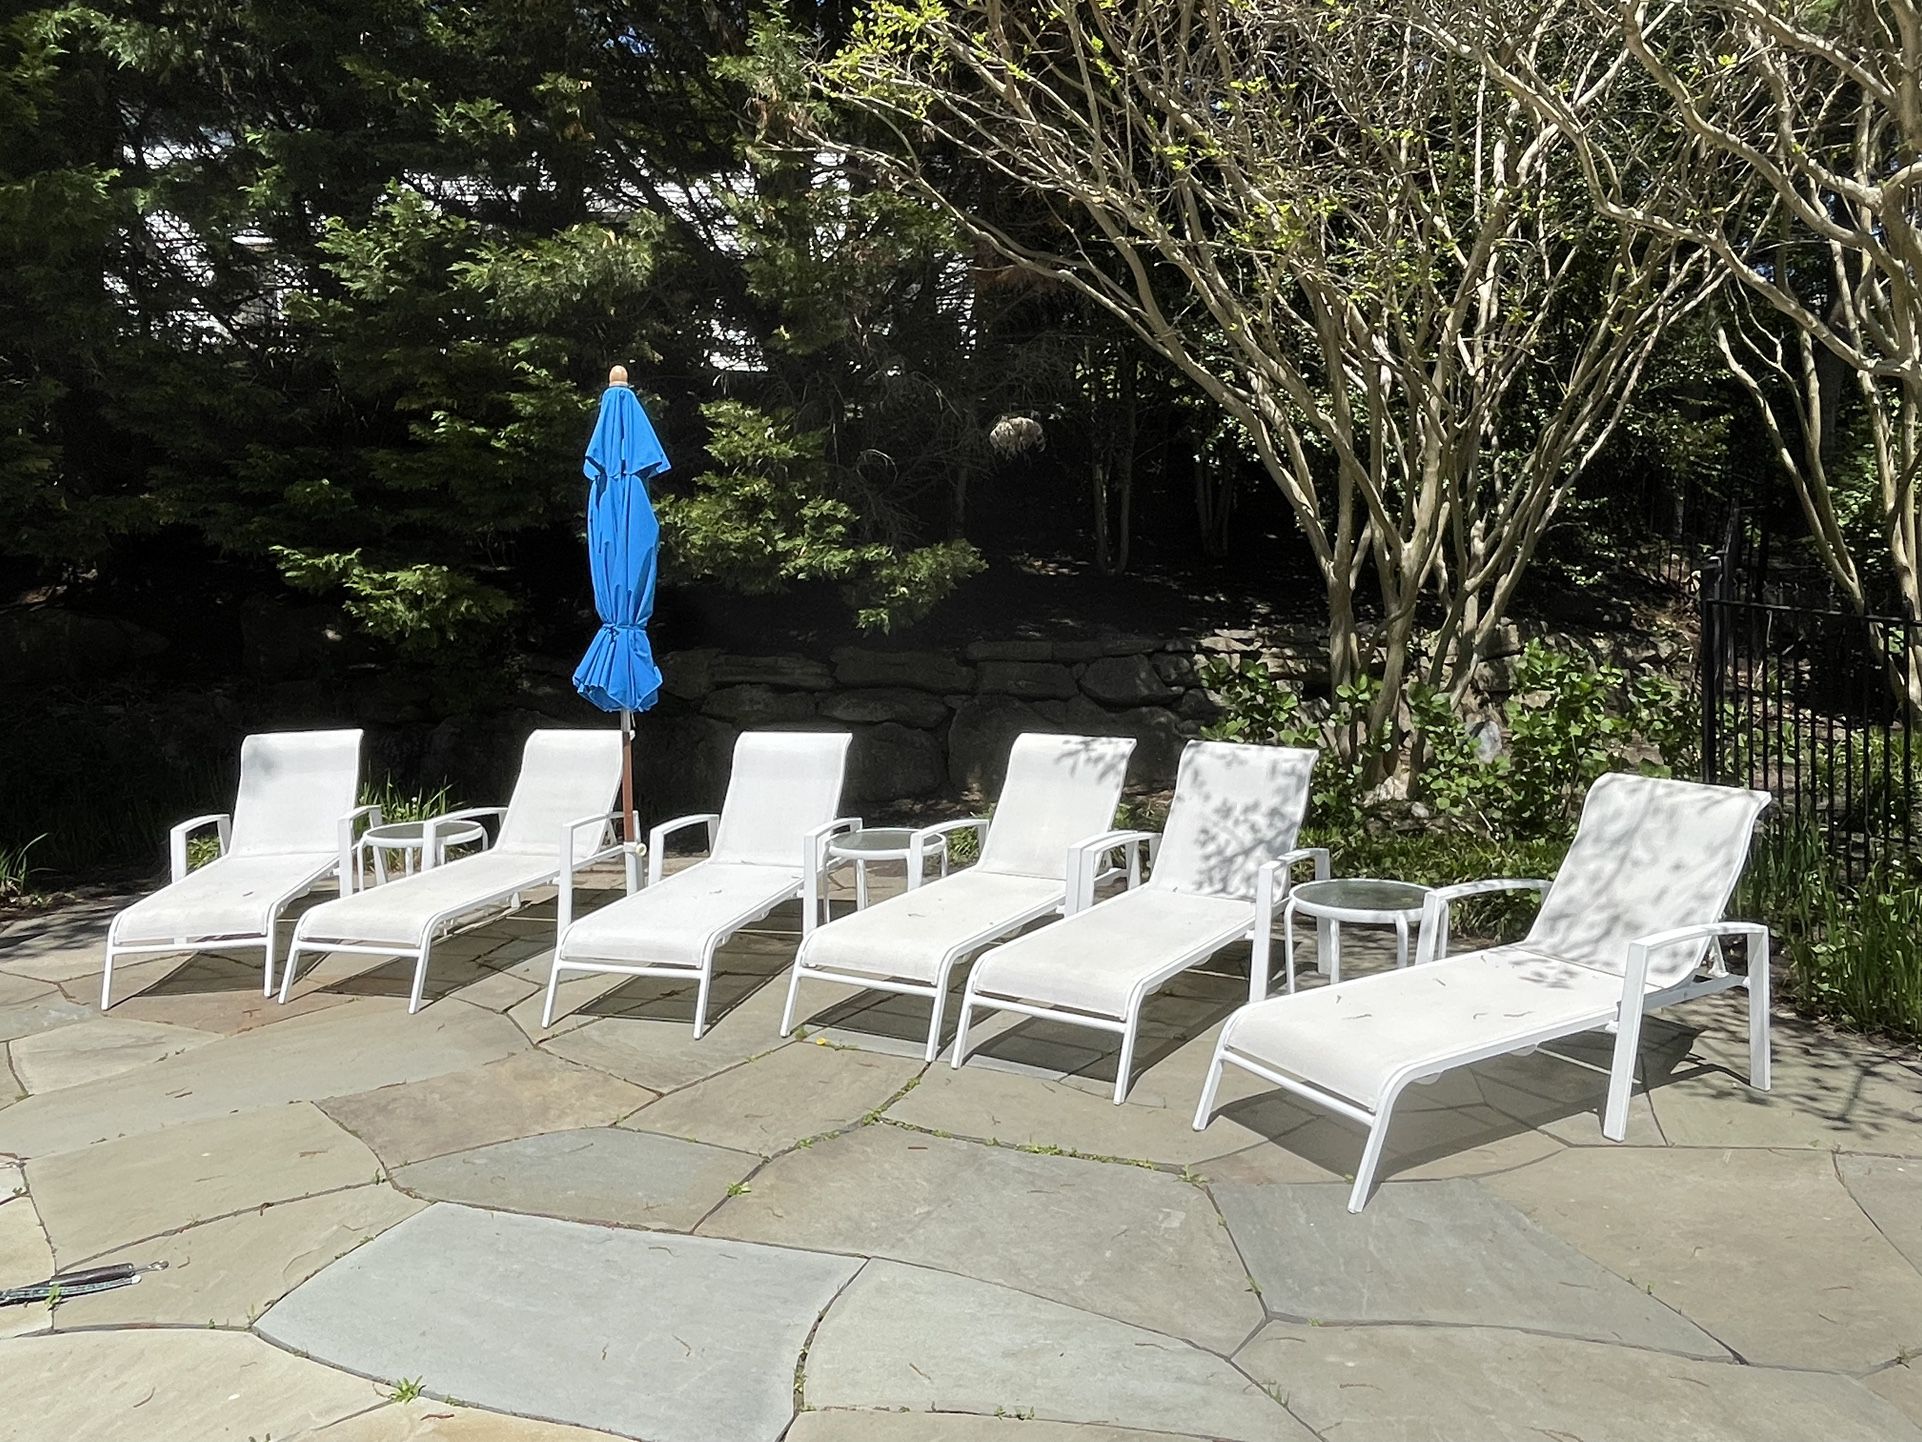 Outdoor Furniture - 6 Chaise Loungers, 3 drink tables and an Umbrella!